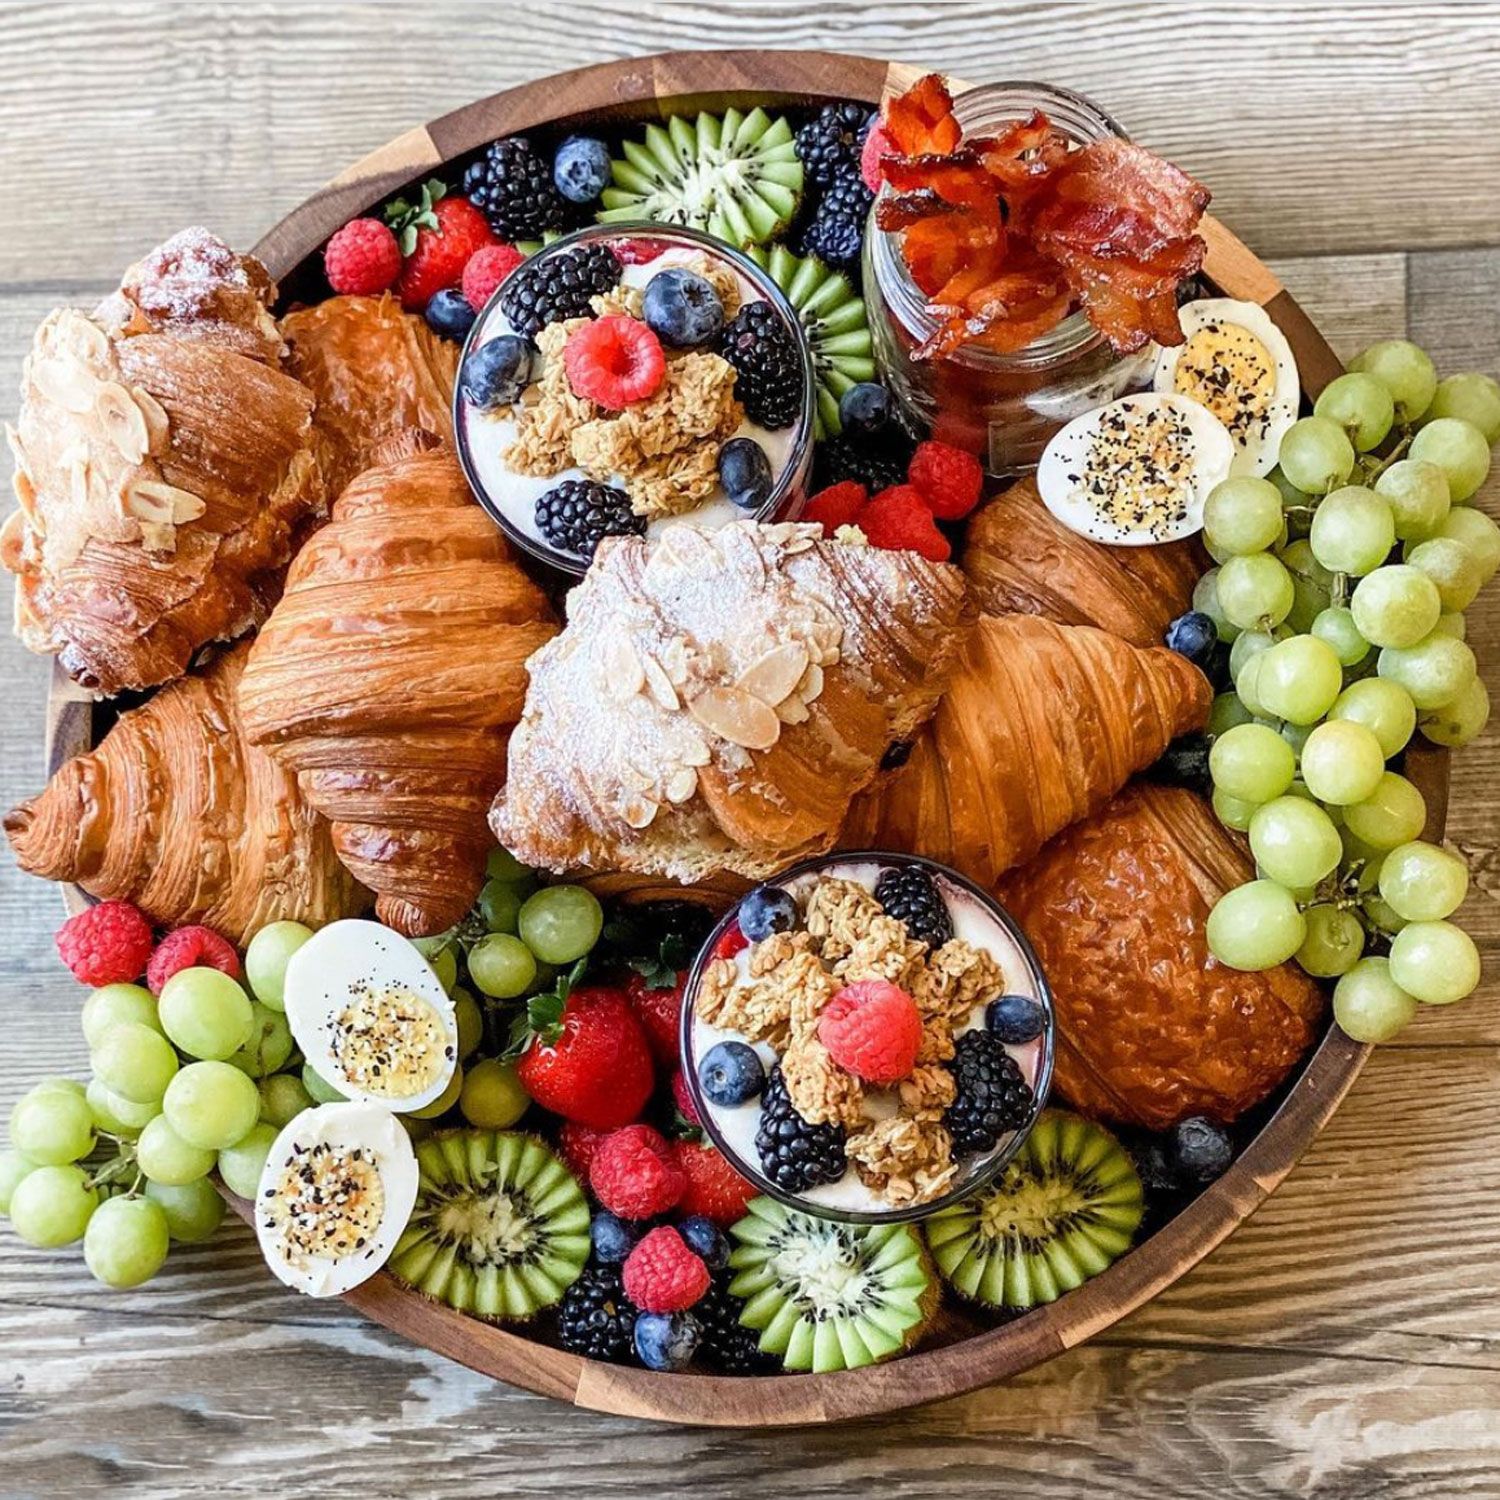 4 Breakfast Charcuterie Boards That Are Worth Waking Up Early